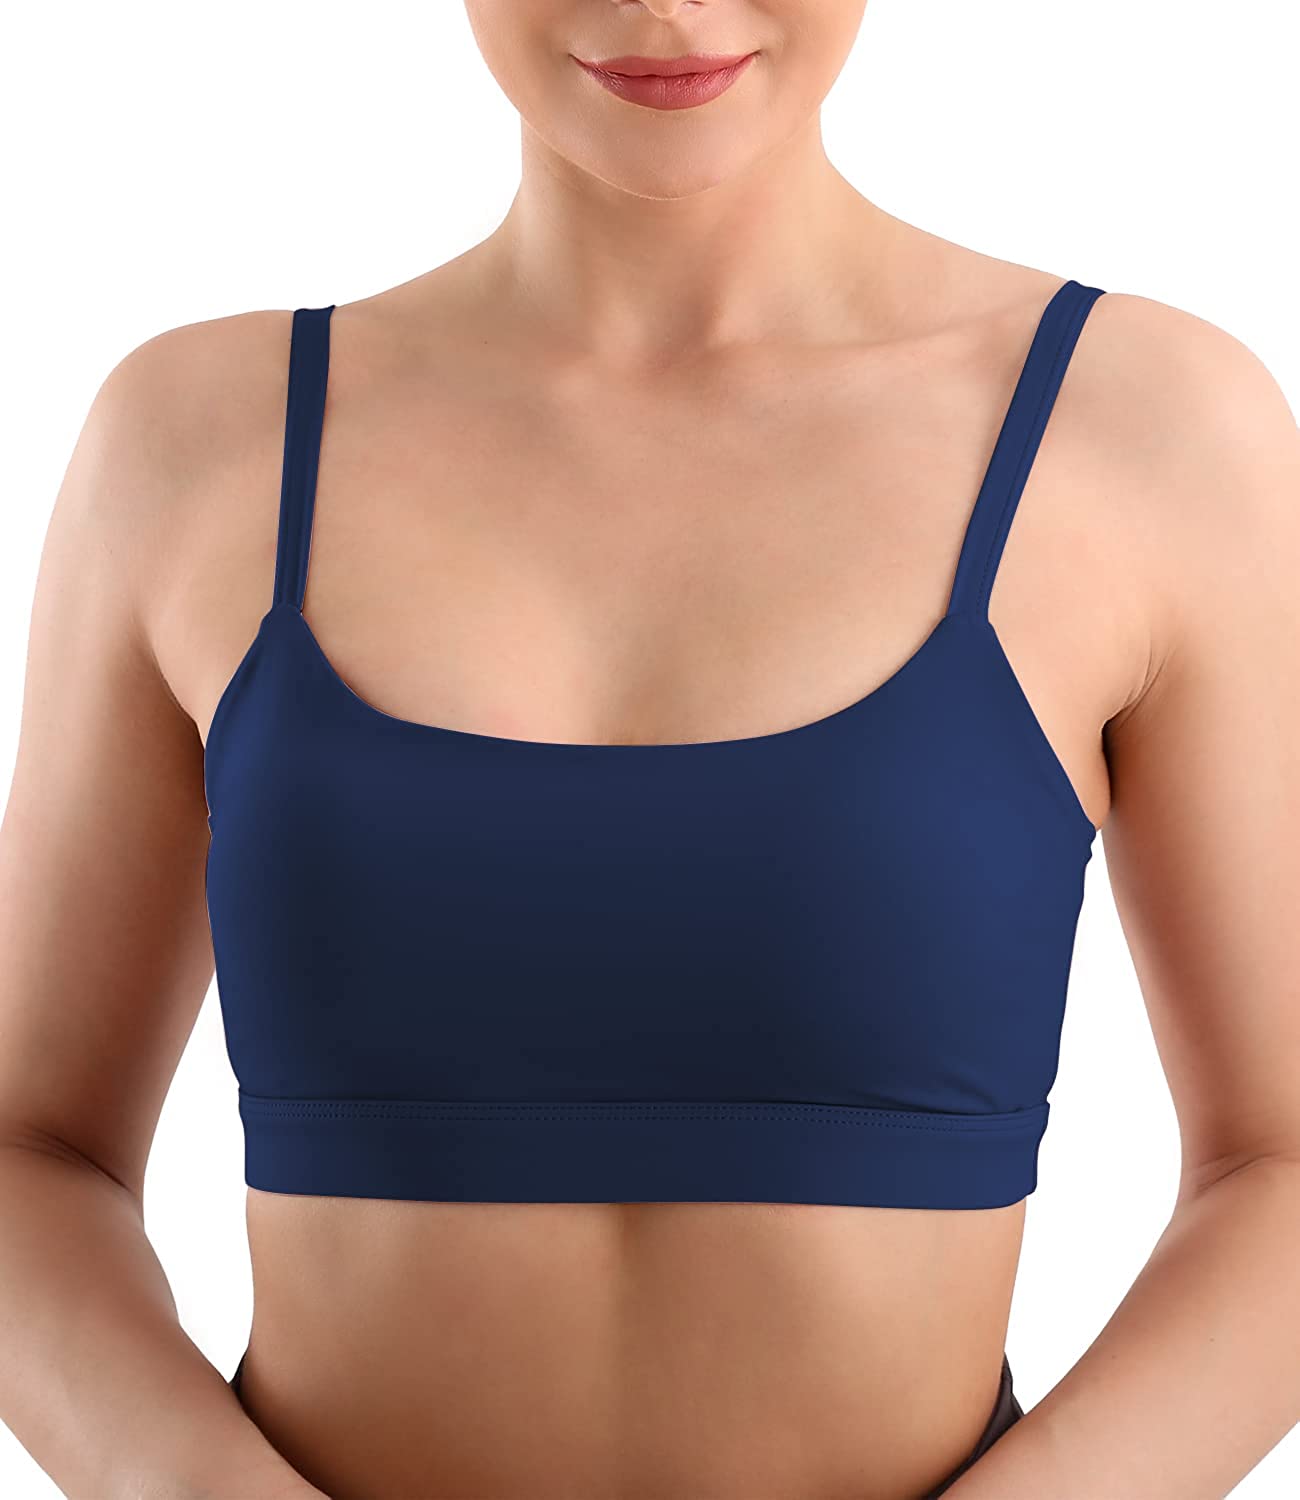 Bandeau Sports Bra Tank Top with Built in Bra No Underwire Removable Pads